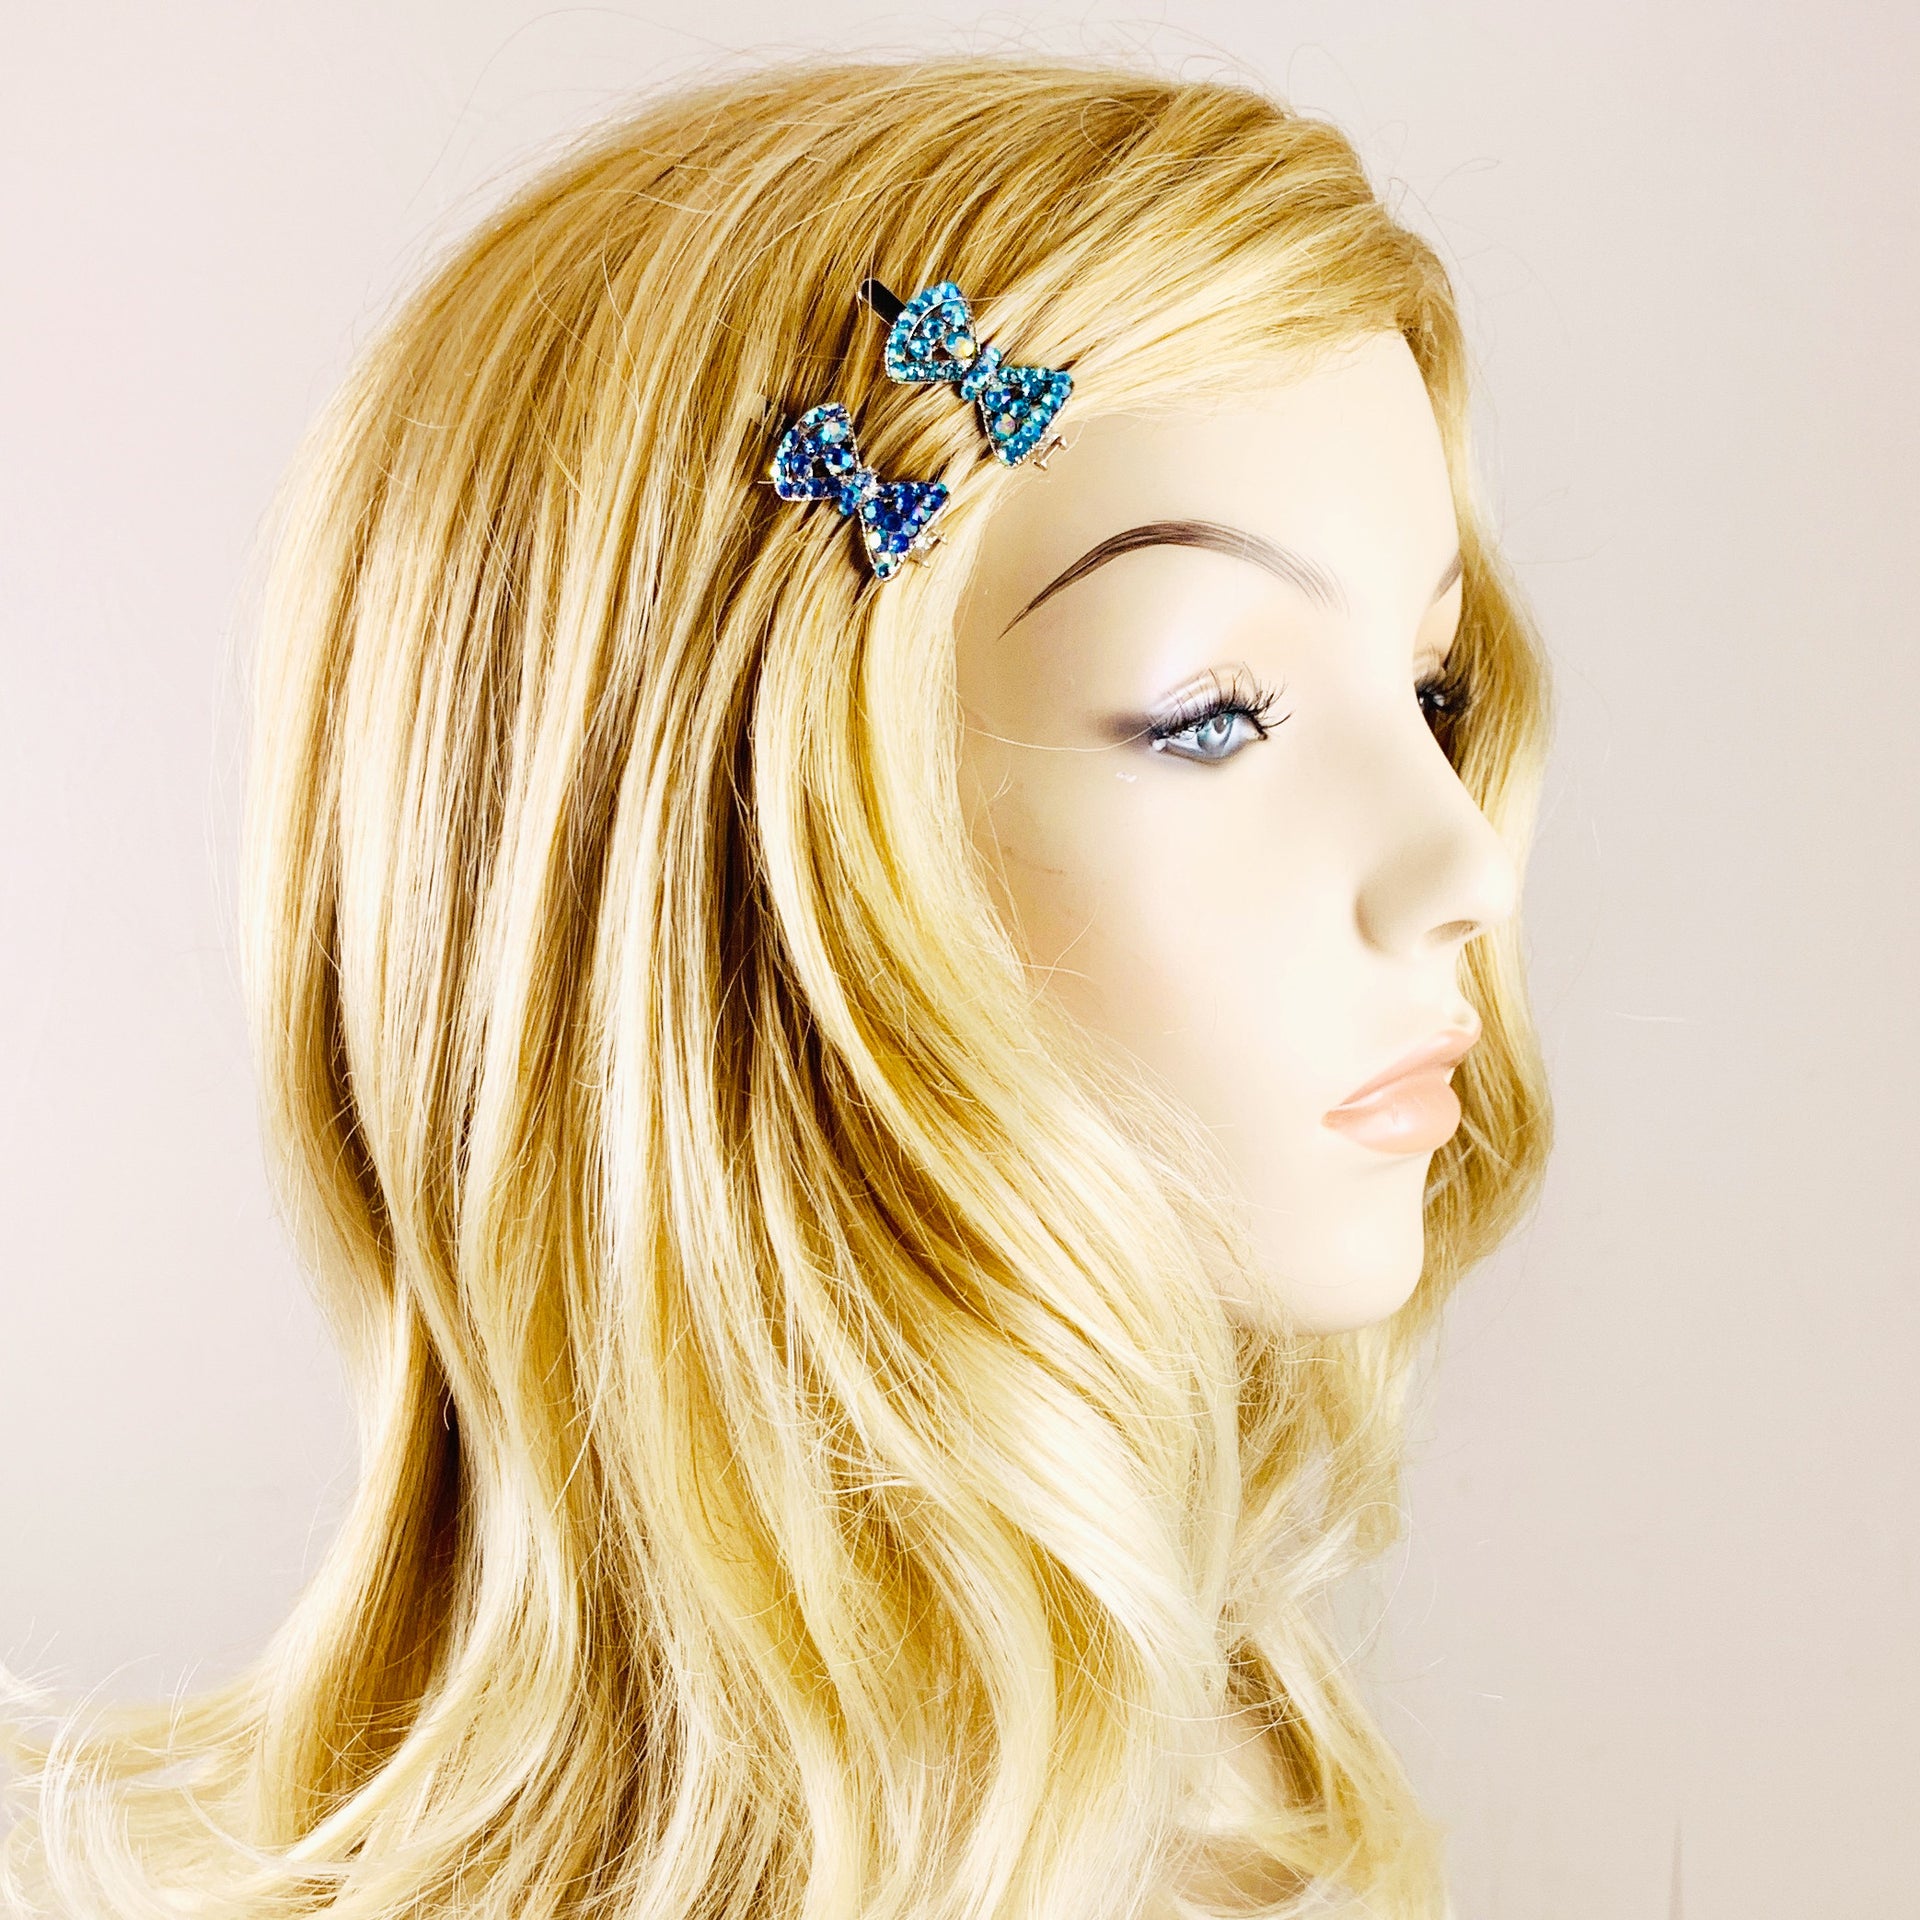 Trista Magnetic Bow Hair Clip Rhinestone Crystal Small Barrette 15 Colors, Magnetic Clip - MOGHANT